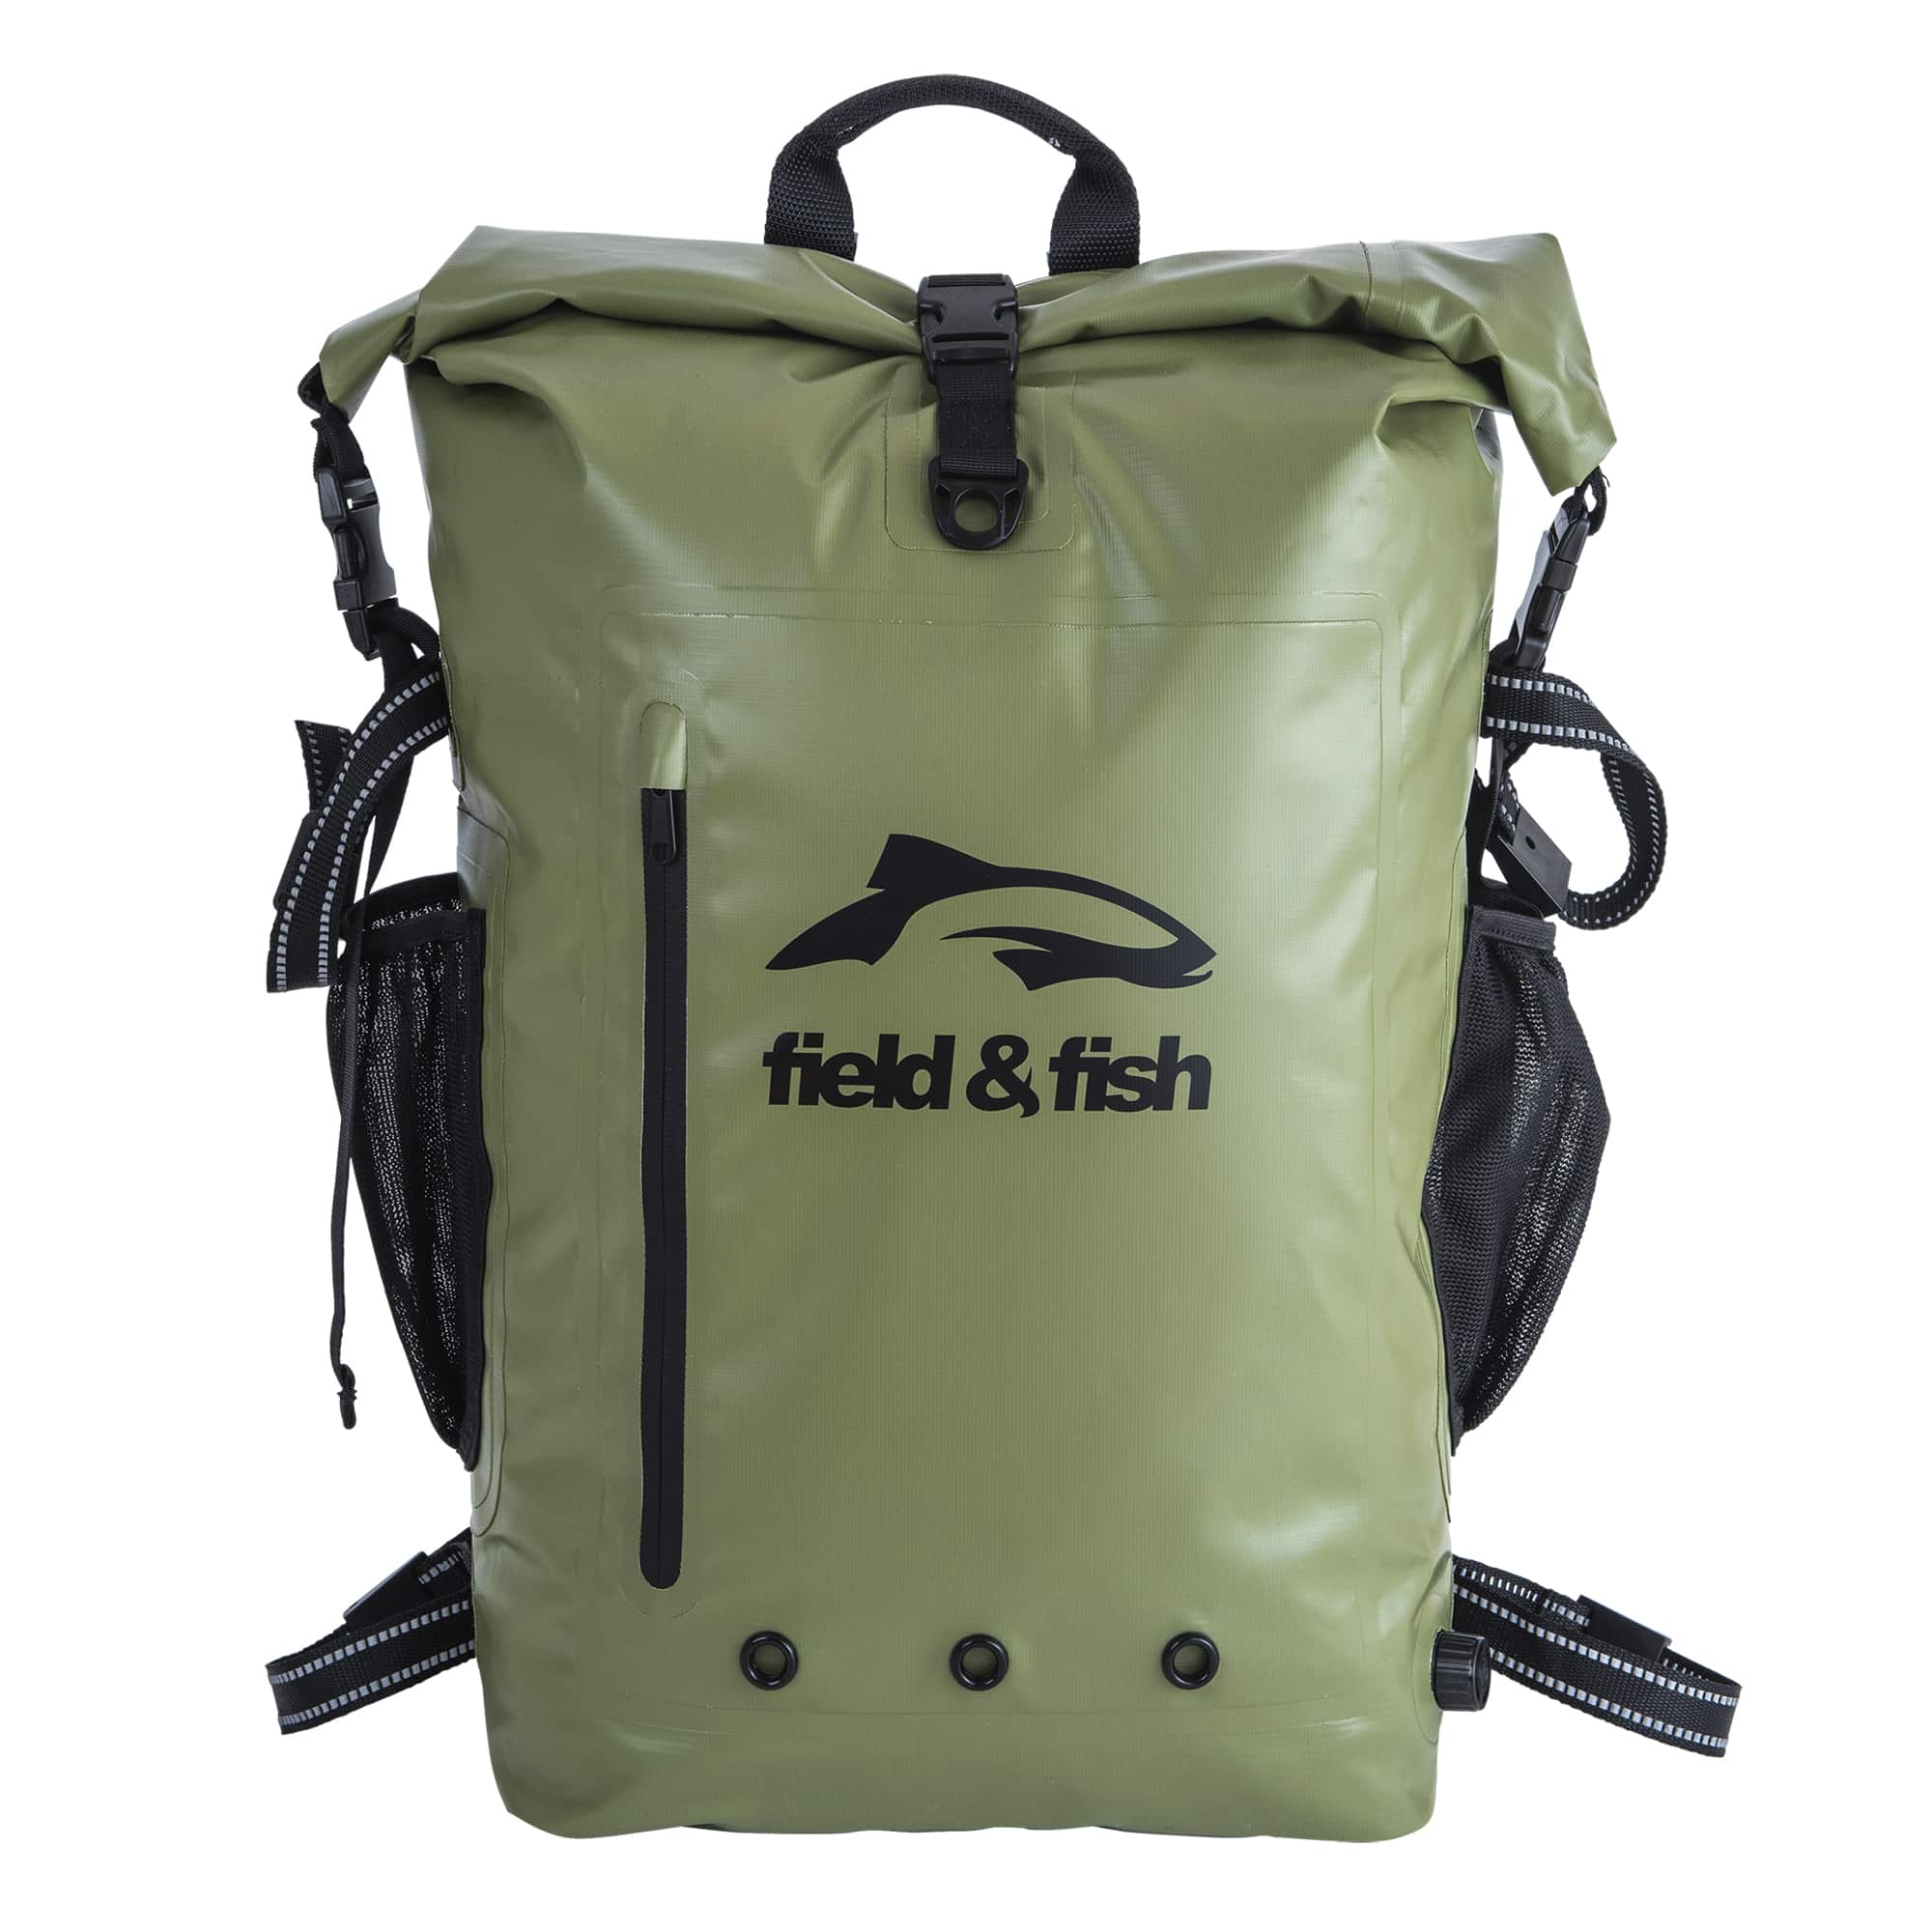 Test chest pack sac à dos étanches Field and Fish